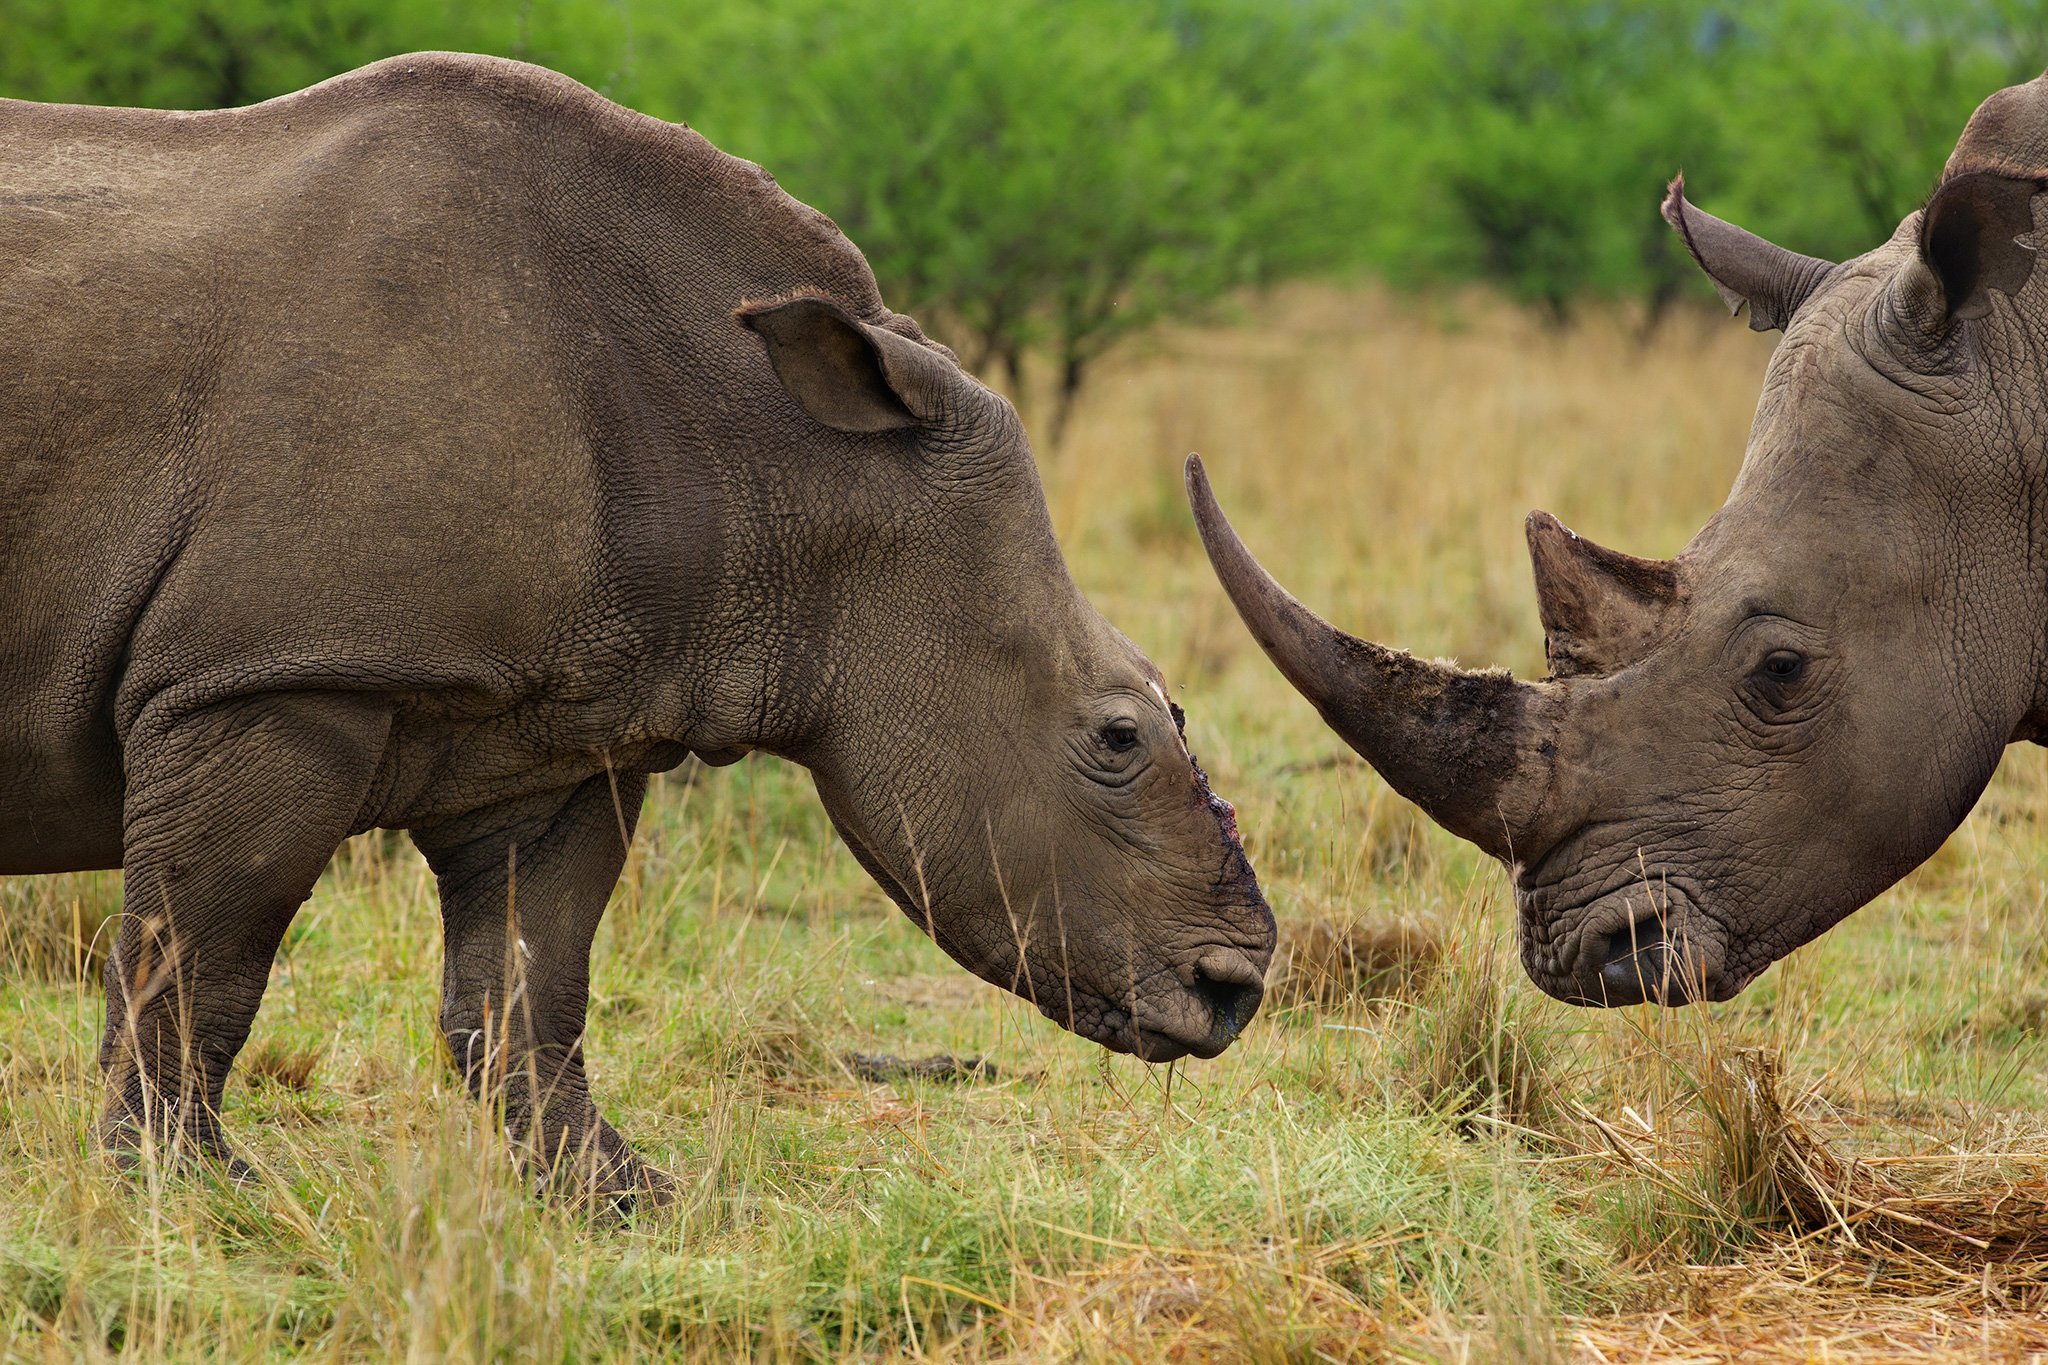 South Africa Just Lifted Its Ban on the Rhino Horn Trade